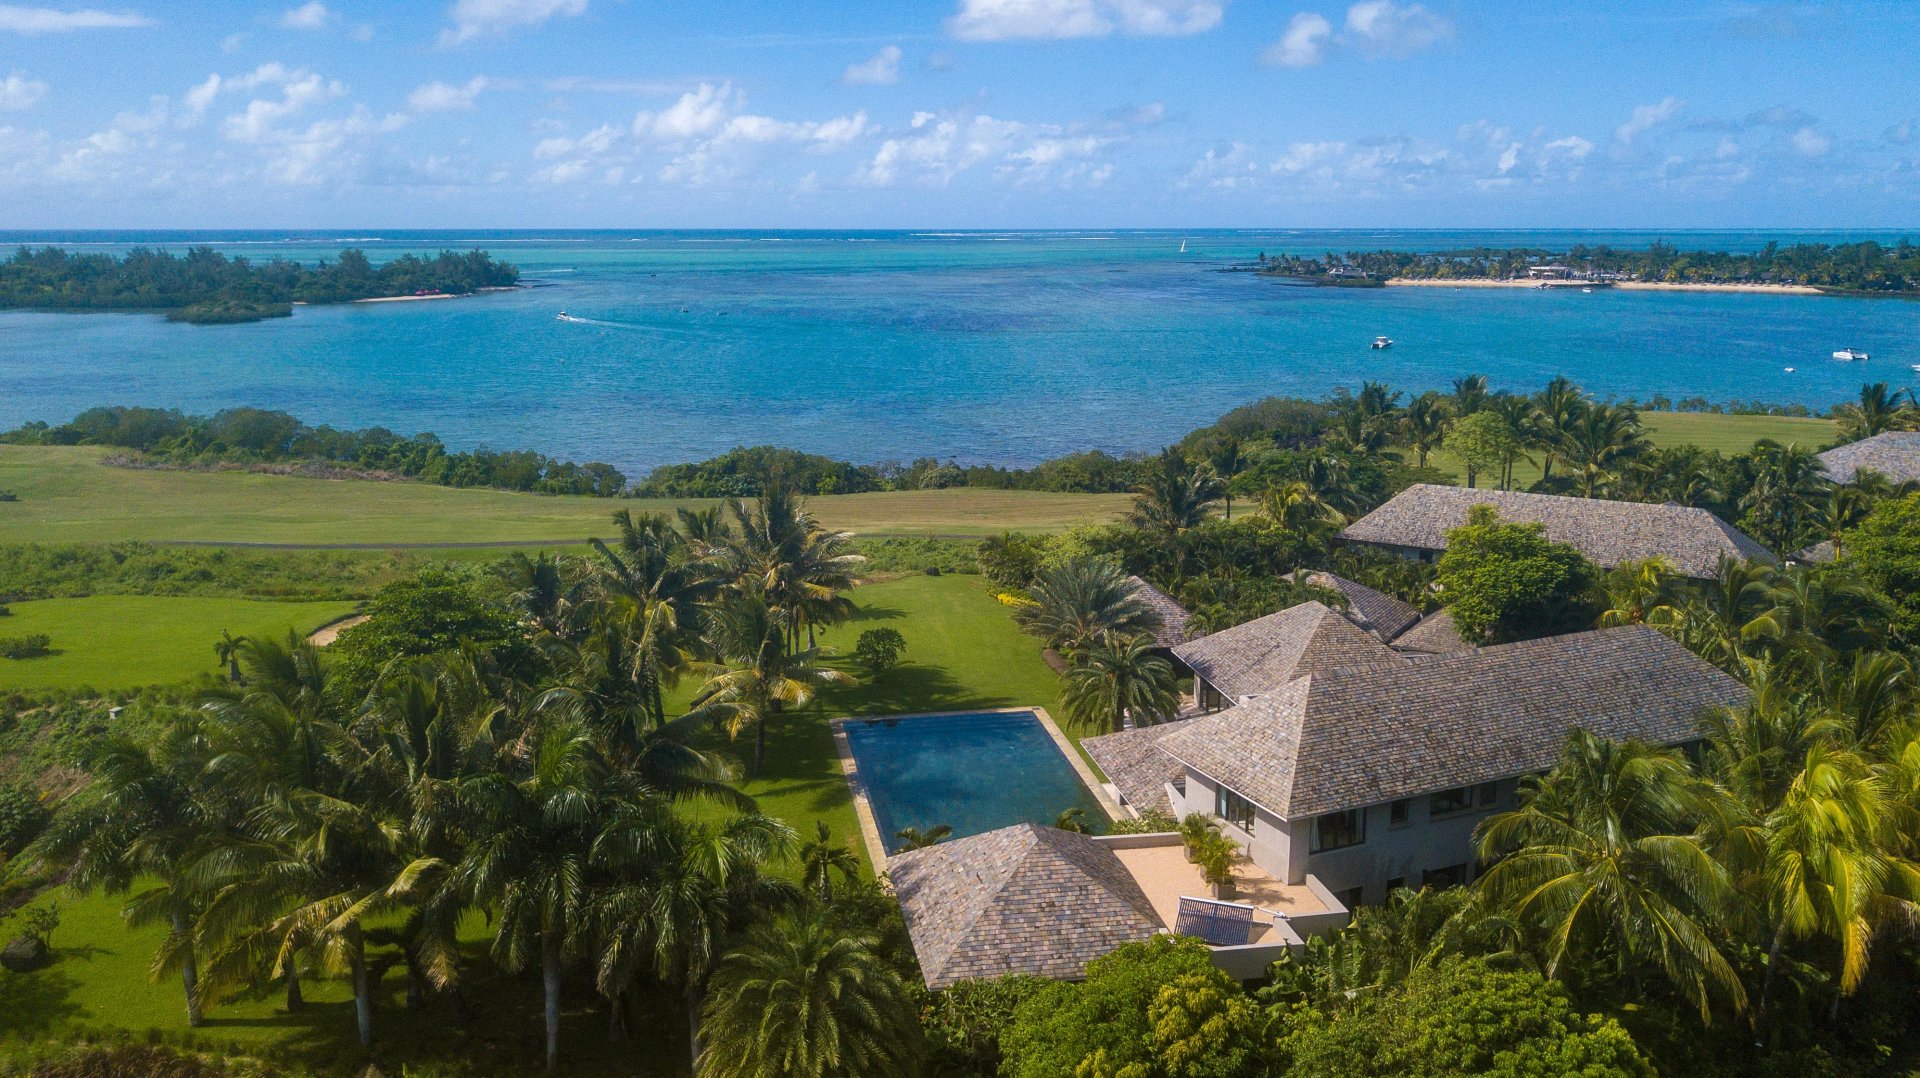 Beau Champ - Mauritius - House, 10 rooms, 6 bedrooms - Slideshow Picture 1